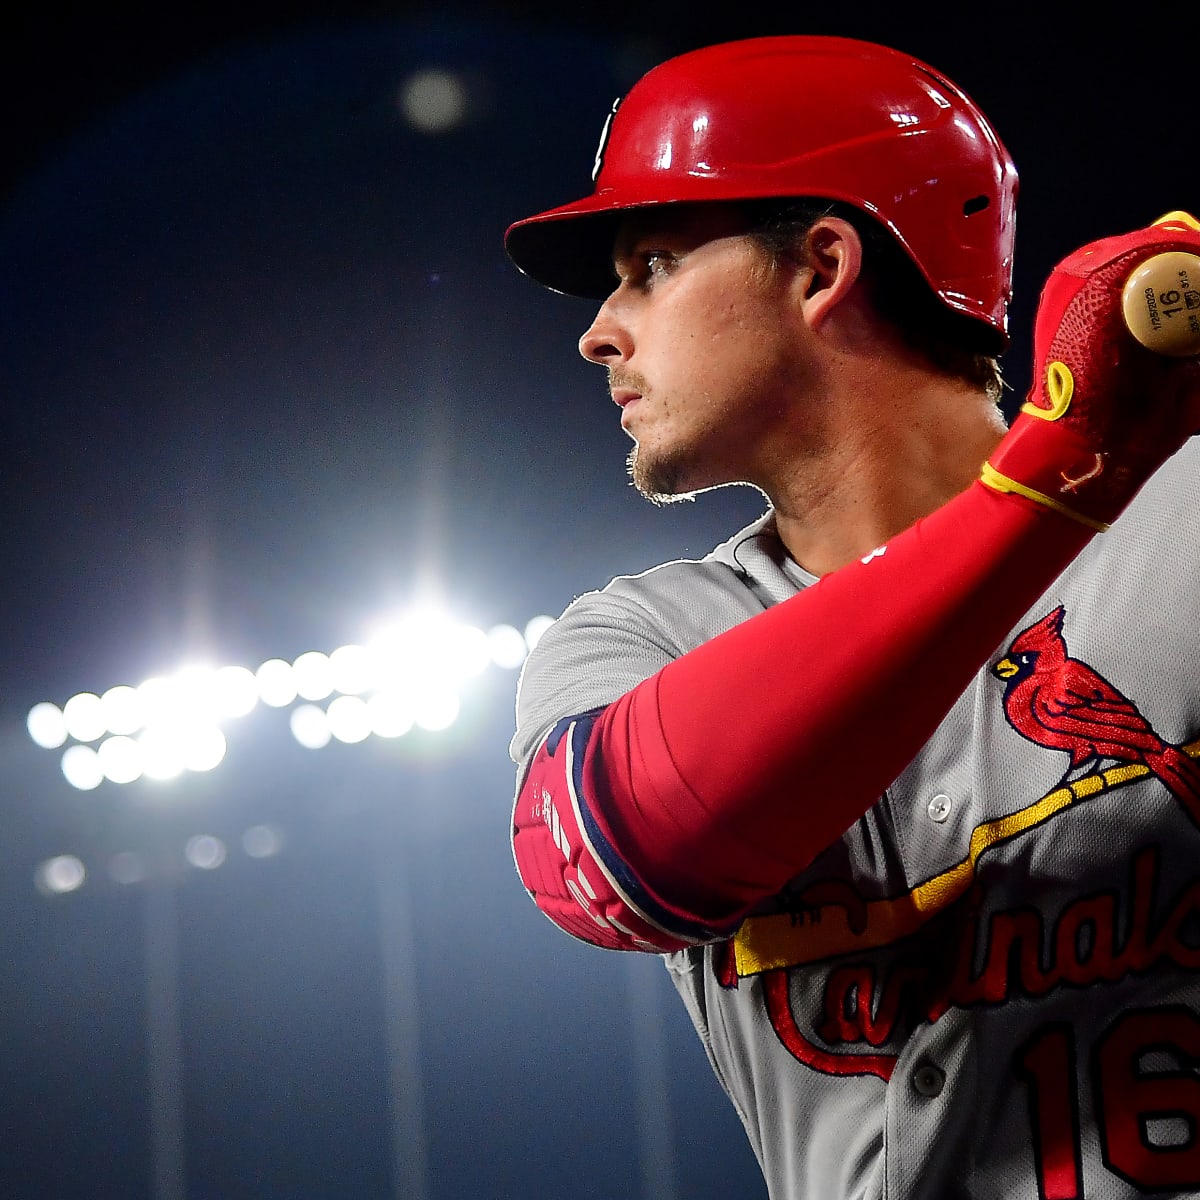 Cardinals: Nolan Arenado sounds like he's lost all hope in team